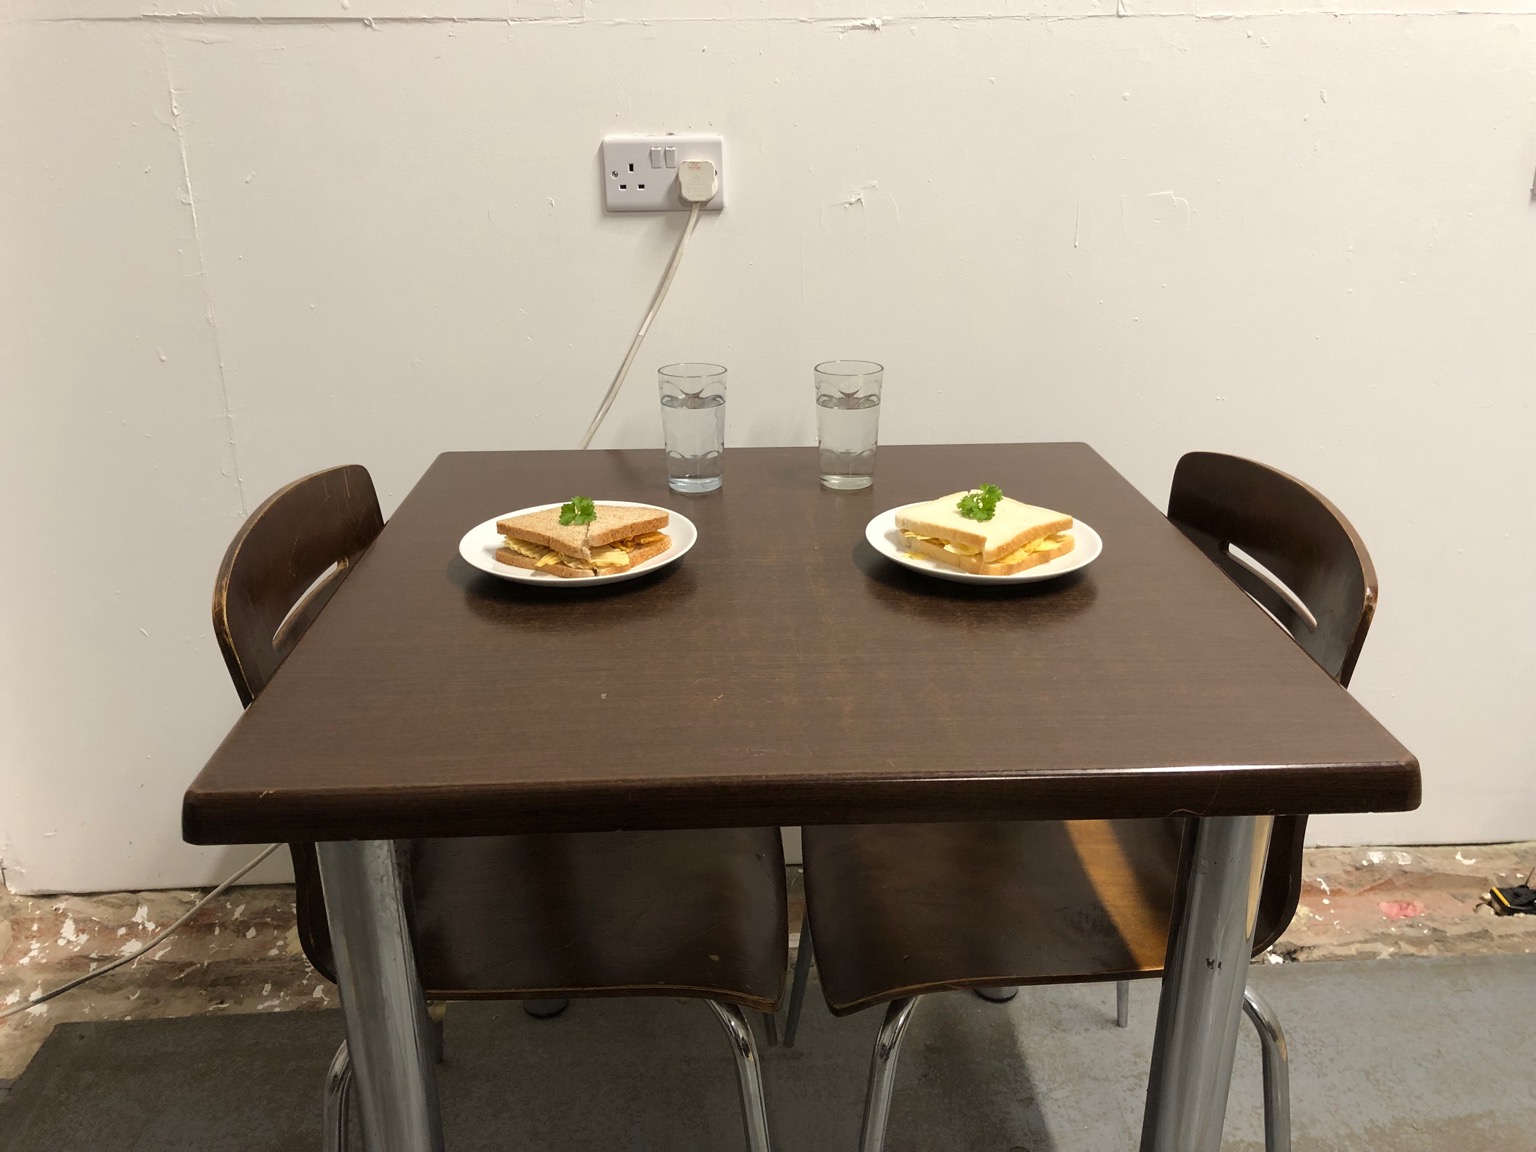 Dining table with two crisp sandwiches laid out